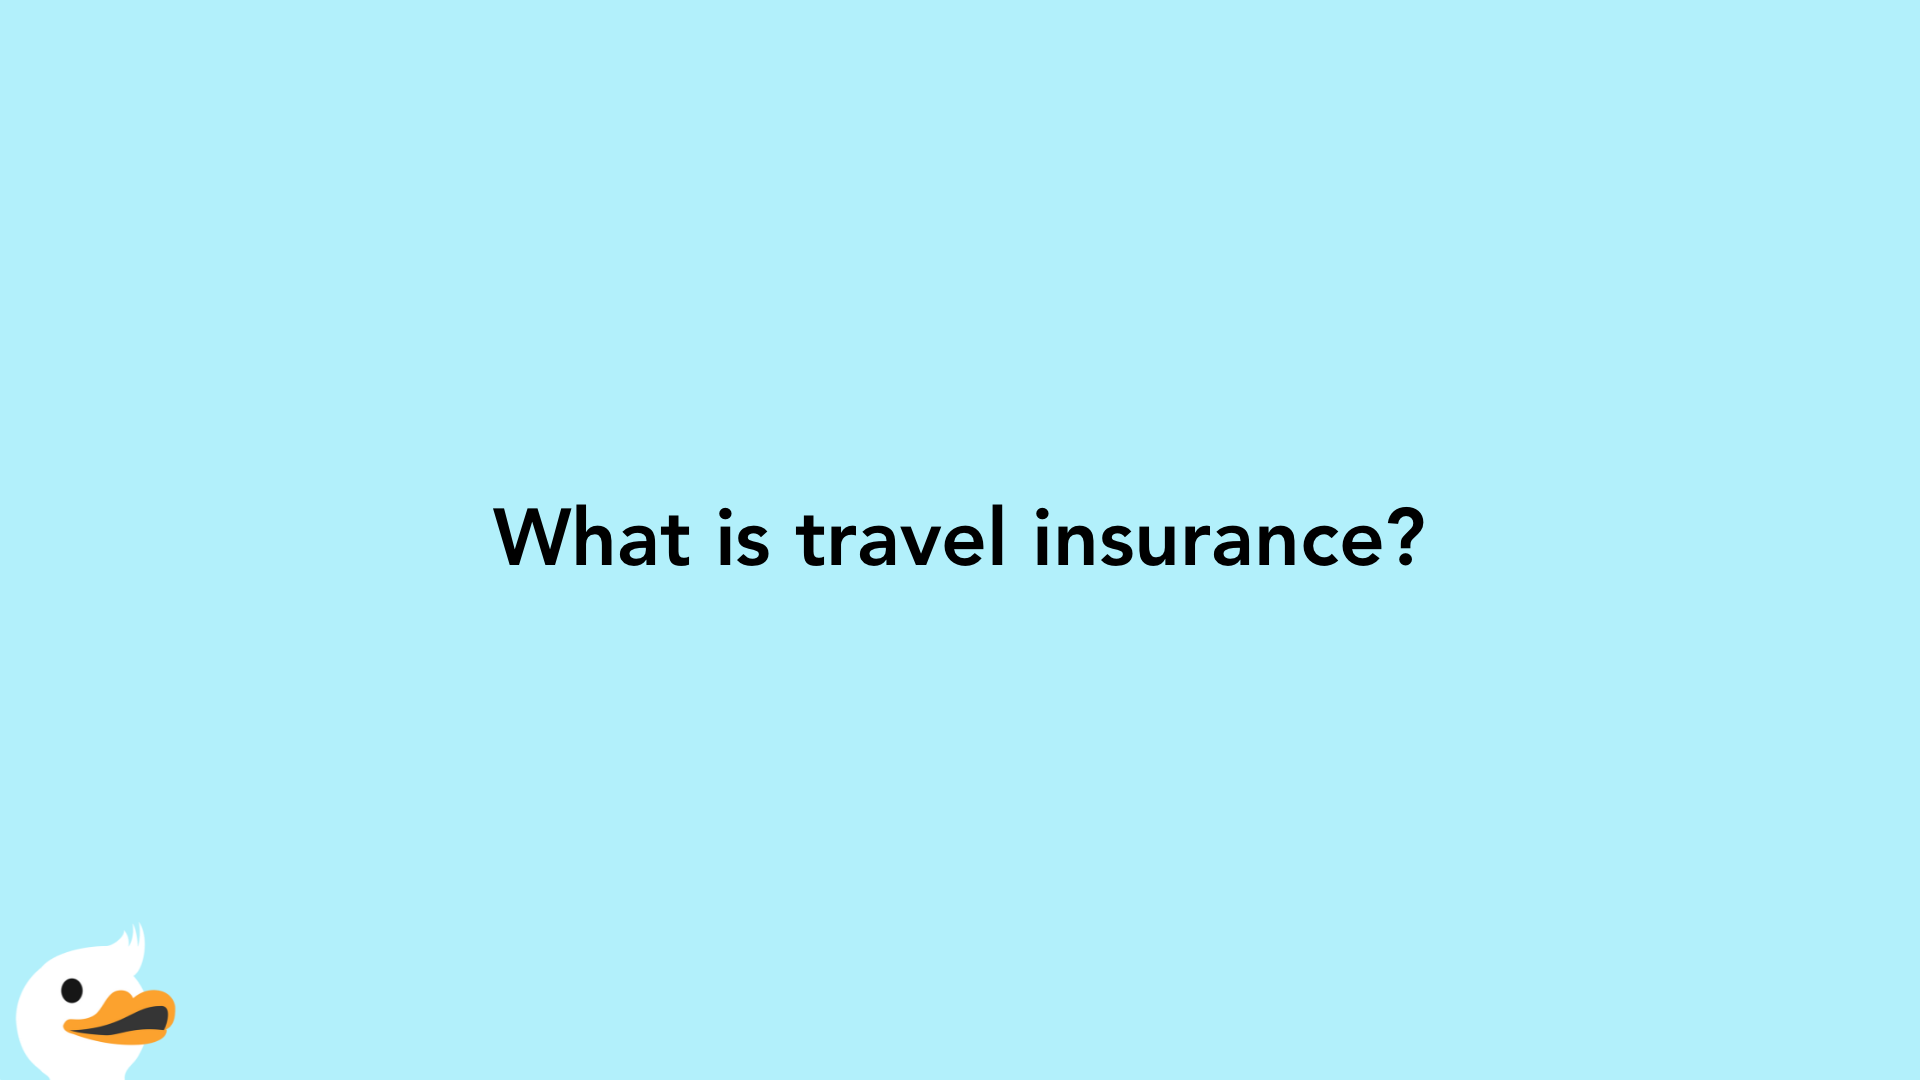 What is travel insurance?